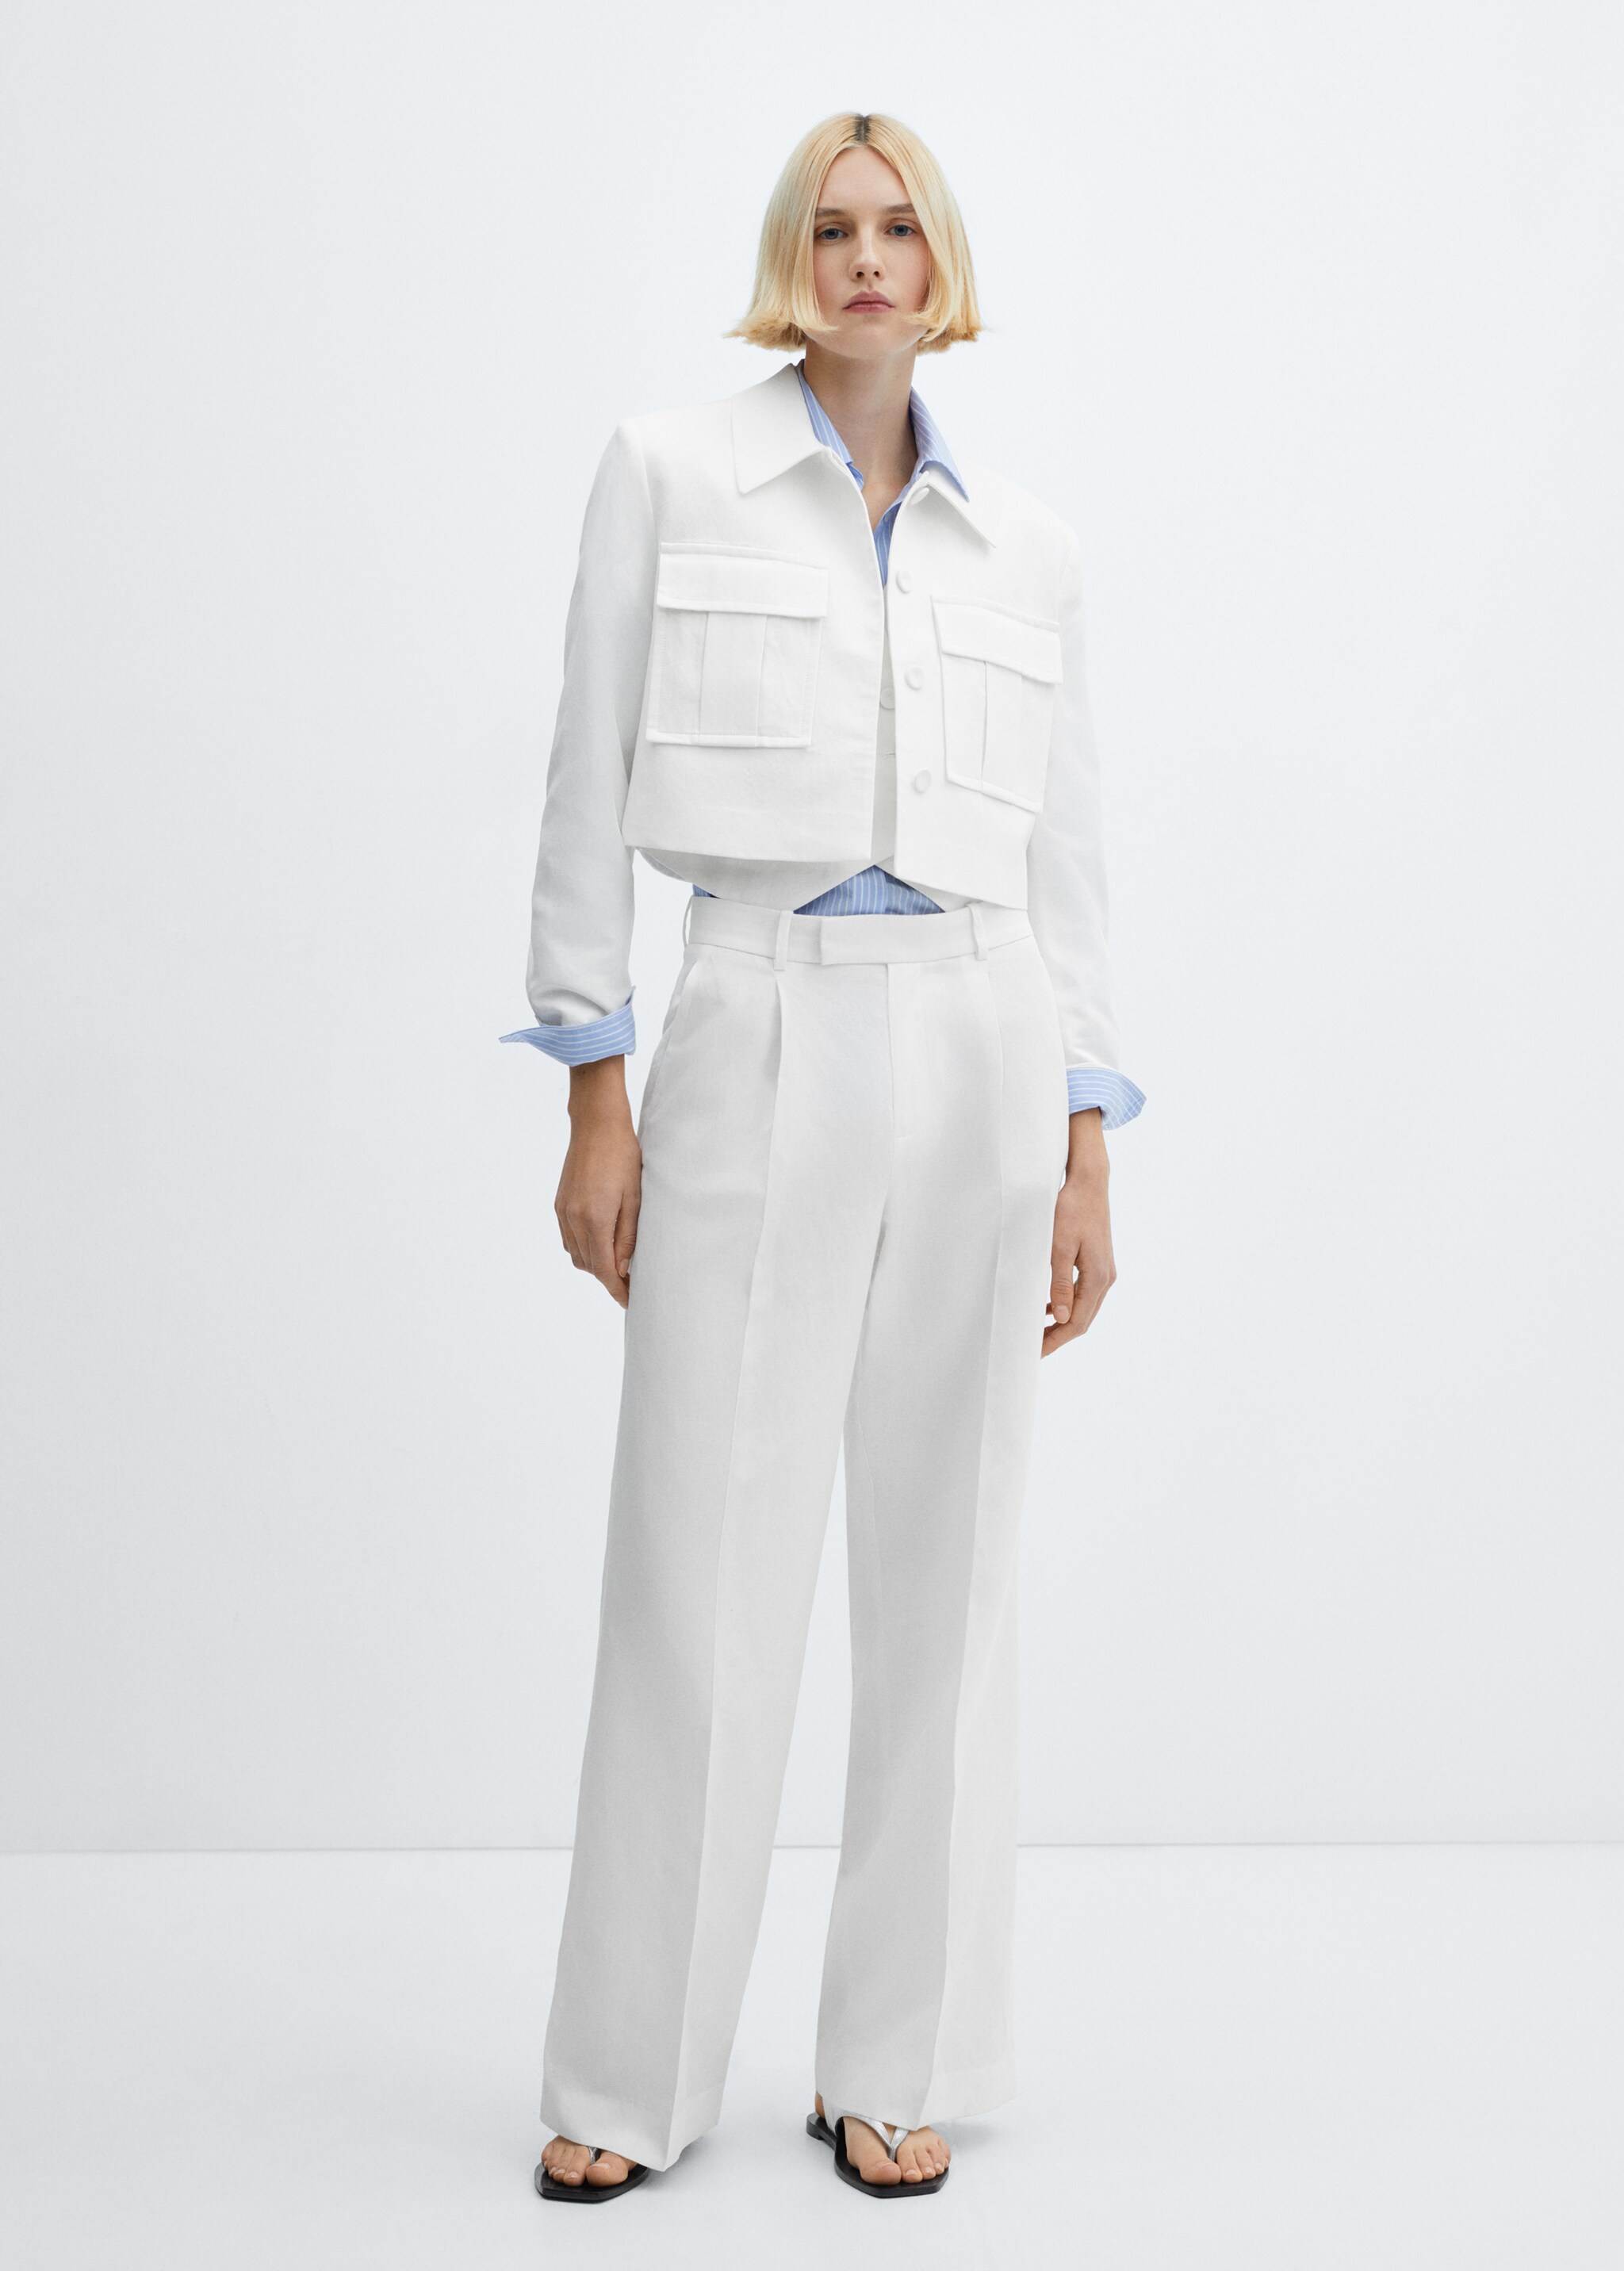 Crop suit jacket with pockets - General plane